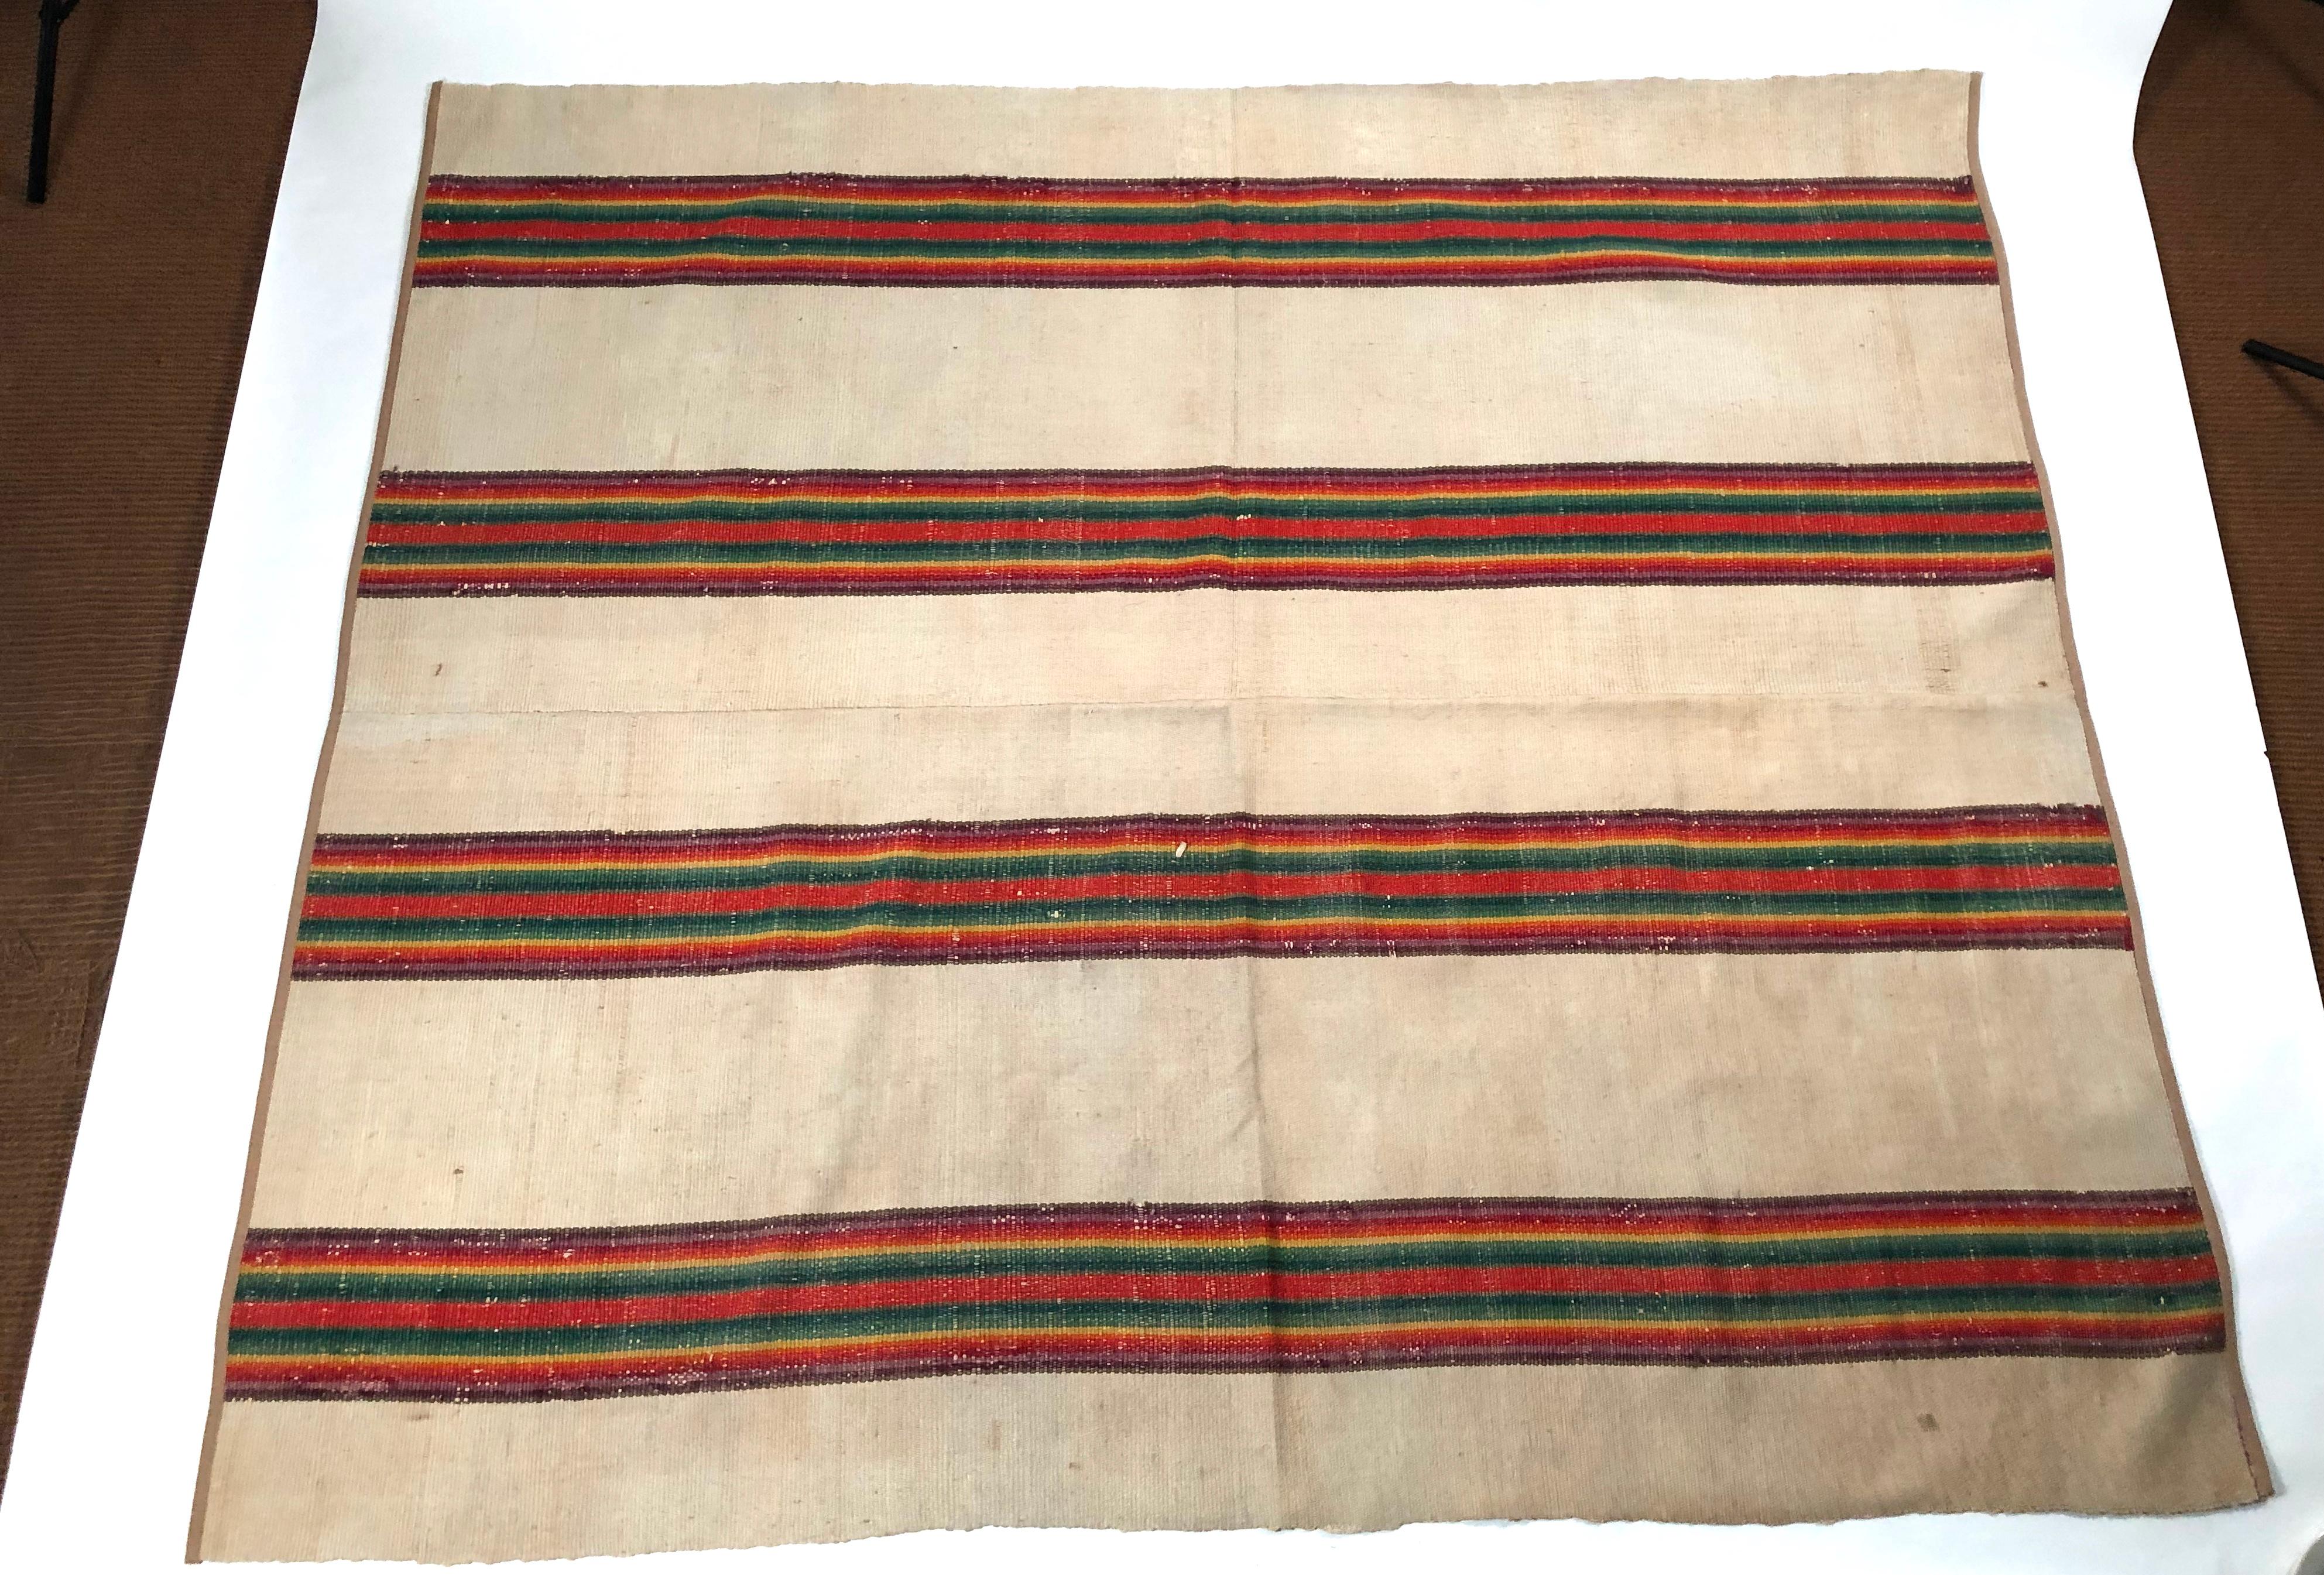 A 19th century American, reversible, Venetian striped flat-weave wool and cotton carpet, double sided, in vibrant, rainbow hued stripes on a cream colored field, in 2 sections, hand sewn together (as originally made), with tan canvas twill tape